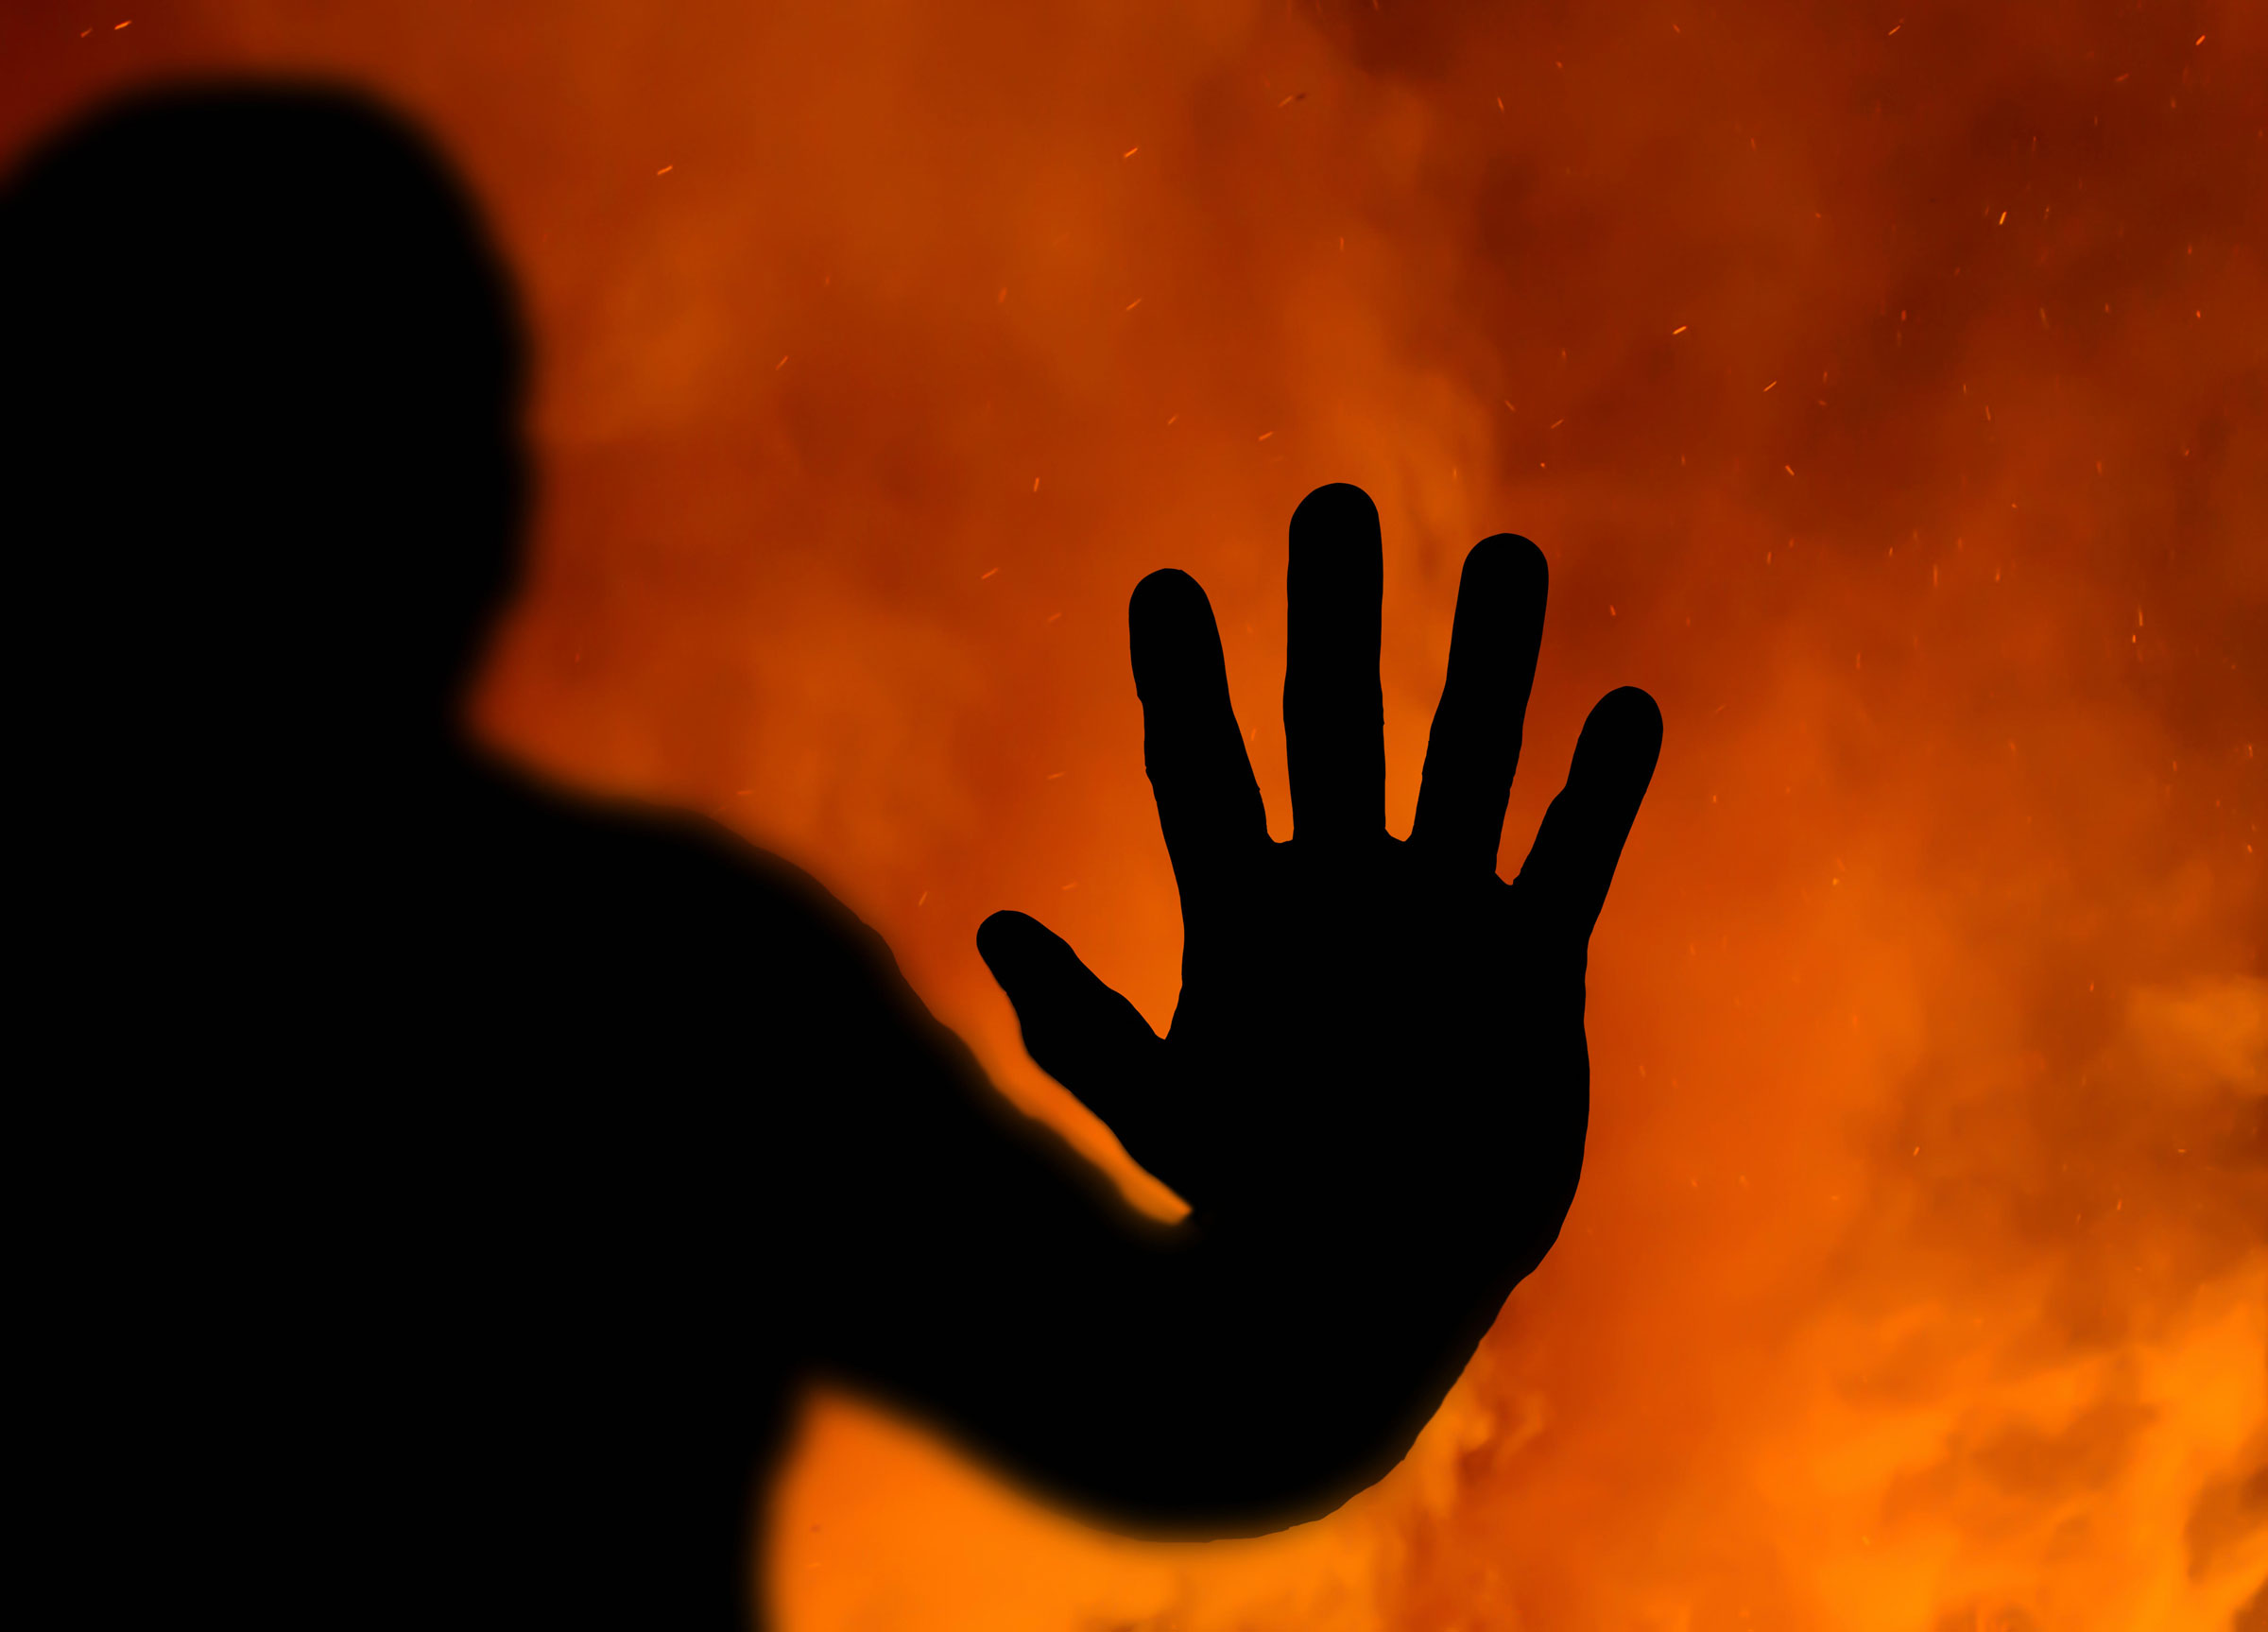 Abstract of a silhouette of the hand pressed up against the inside of a window with a fire raging in the background